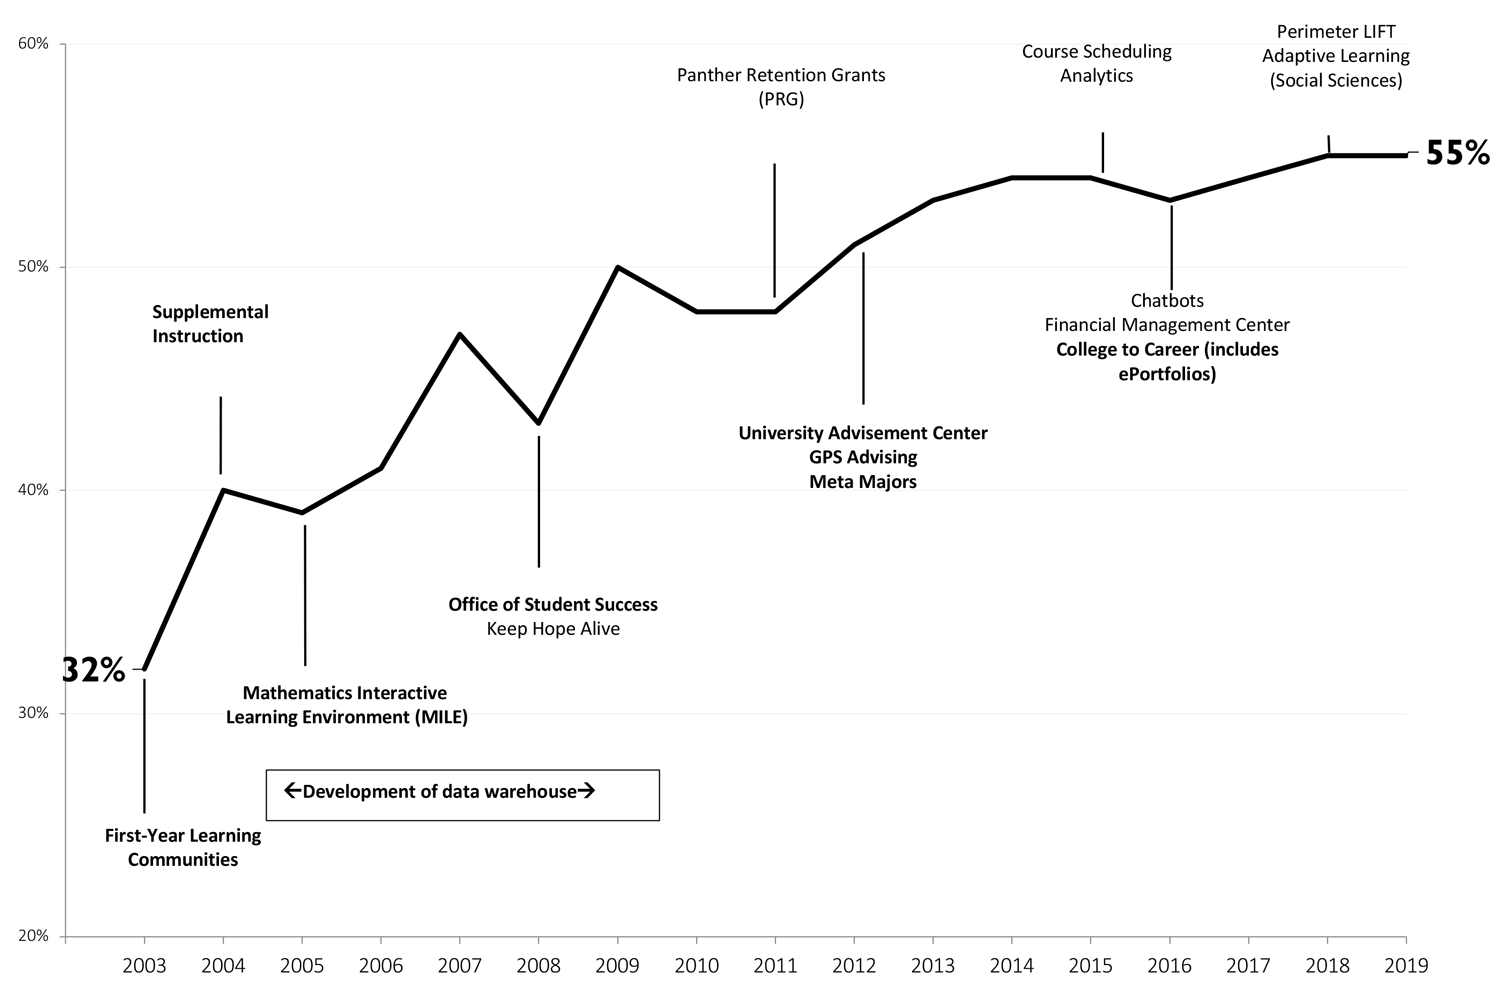 Line graph showing graduation rates over time with initiatives noted in the timeline. Percentages are not exact. 2003: 32%. First-Year Learning Communitites. 2004: 40%. Supplemental Instruction. 2005: 38%. Mathematics Interactive Learning Environment (MILE). 2006: 42%. 2007: 46%. 2008: 43%. Office of Student Success Keep Hope Alive. 2009: 50%. 2010: 48%. 2011: 48%. Partner Retention Grants. 2012: 52%. University Advisement Cetner GPS Advising Meta Majors. 2013: 54%. 2014: 55%. 2015: 55%. Course Scheduling Analytics 2016: 53%. Chatbots Financial management Center College to Career (includes e-portfolios). 2017: 54%. 2018: 55%. Perimeter LIFT Adaptive Learning (Social Sciences). 2019: 55%.